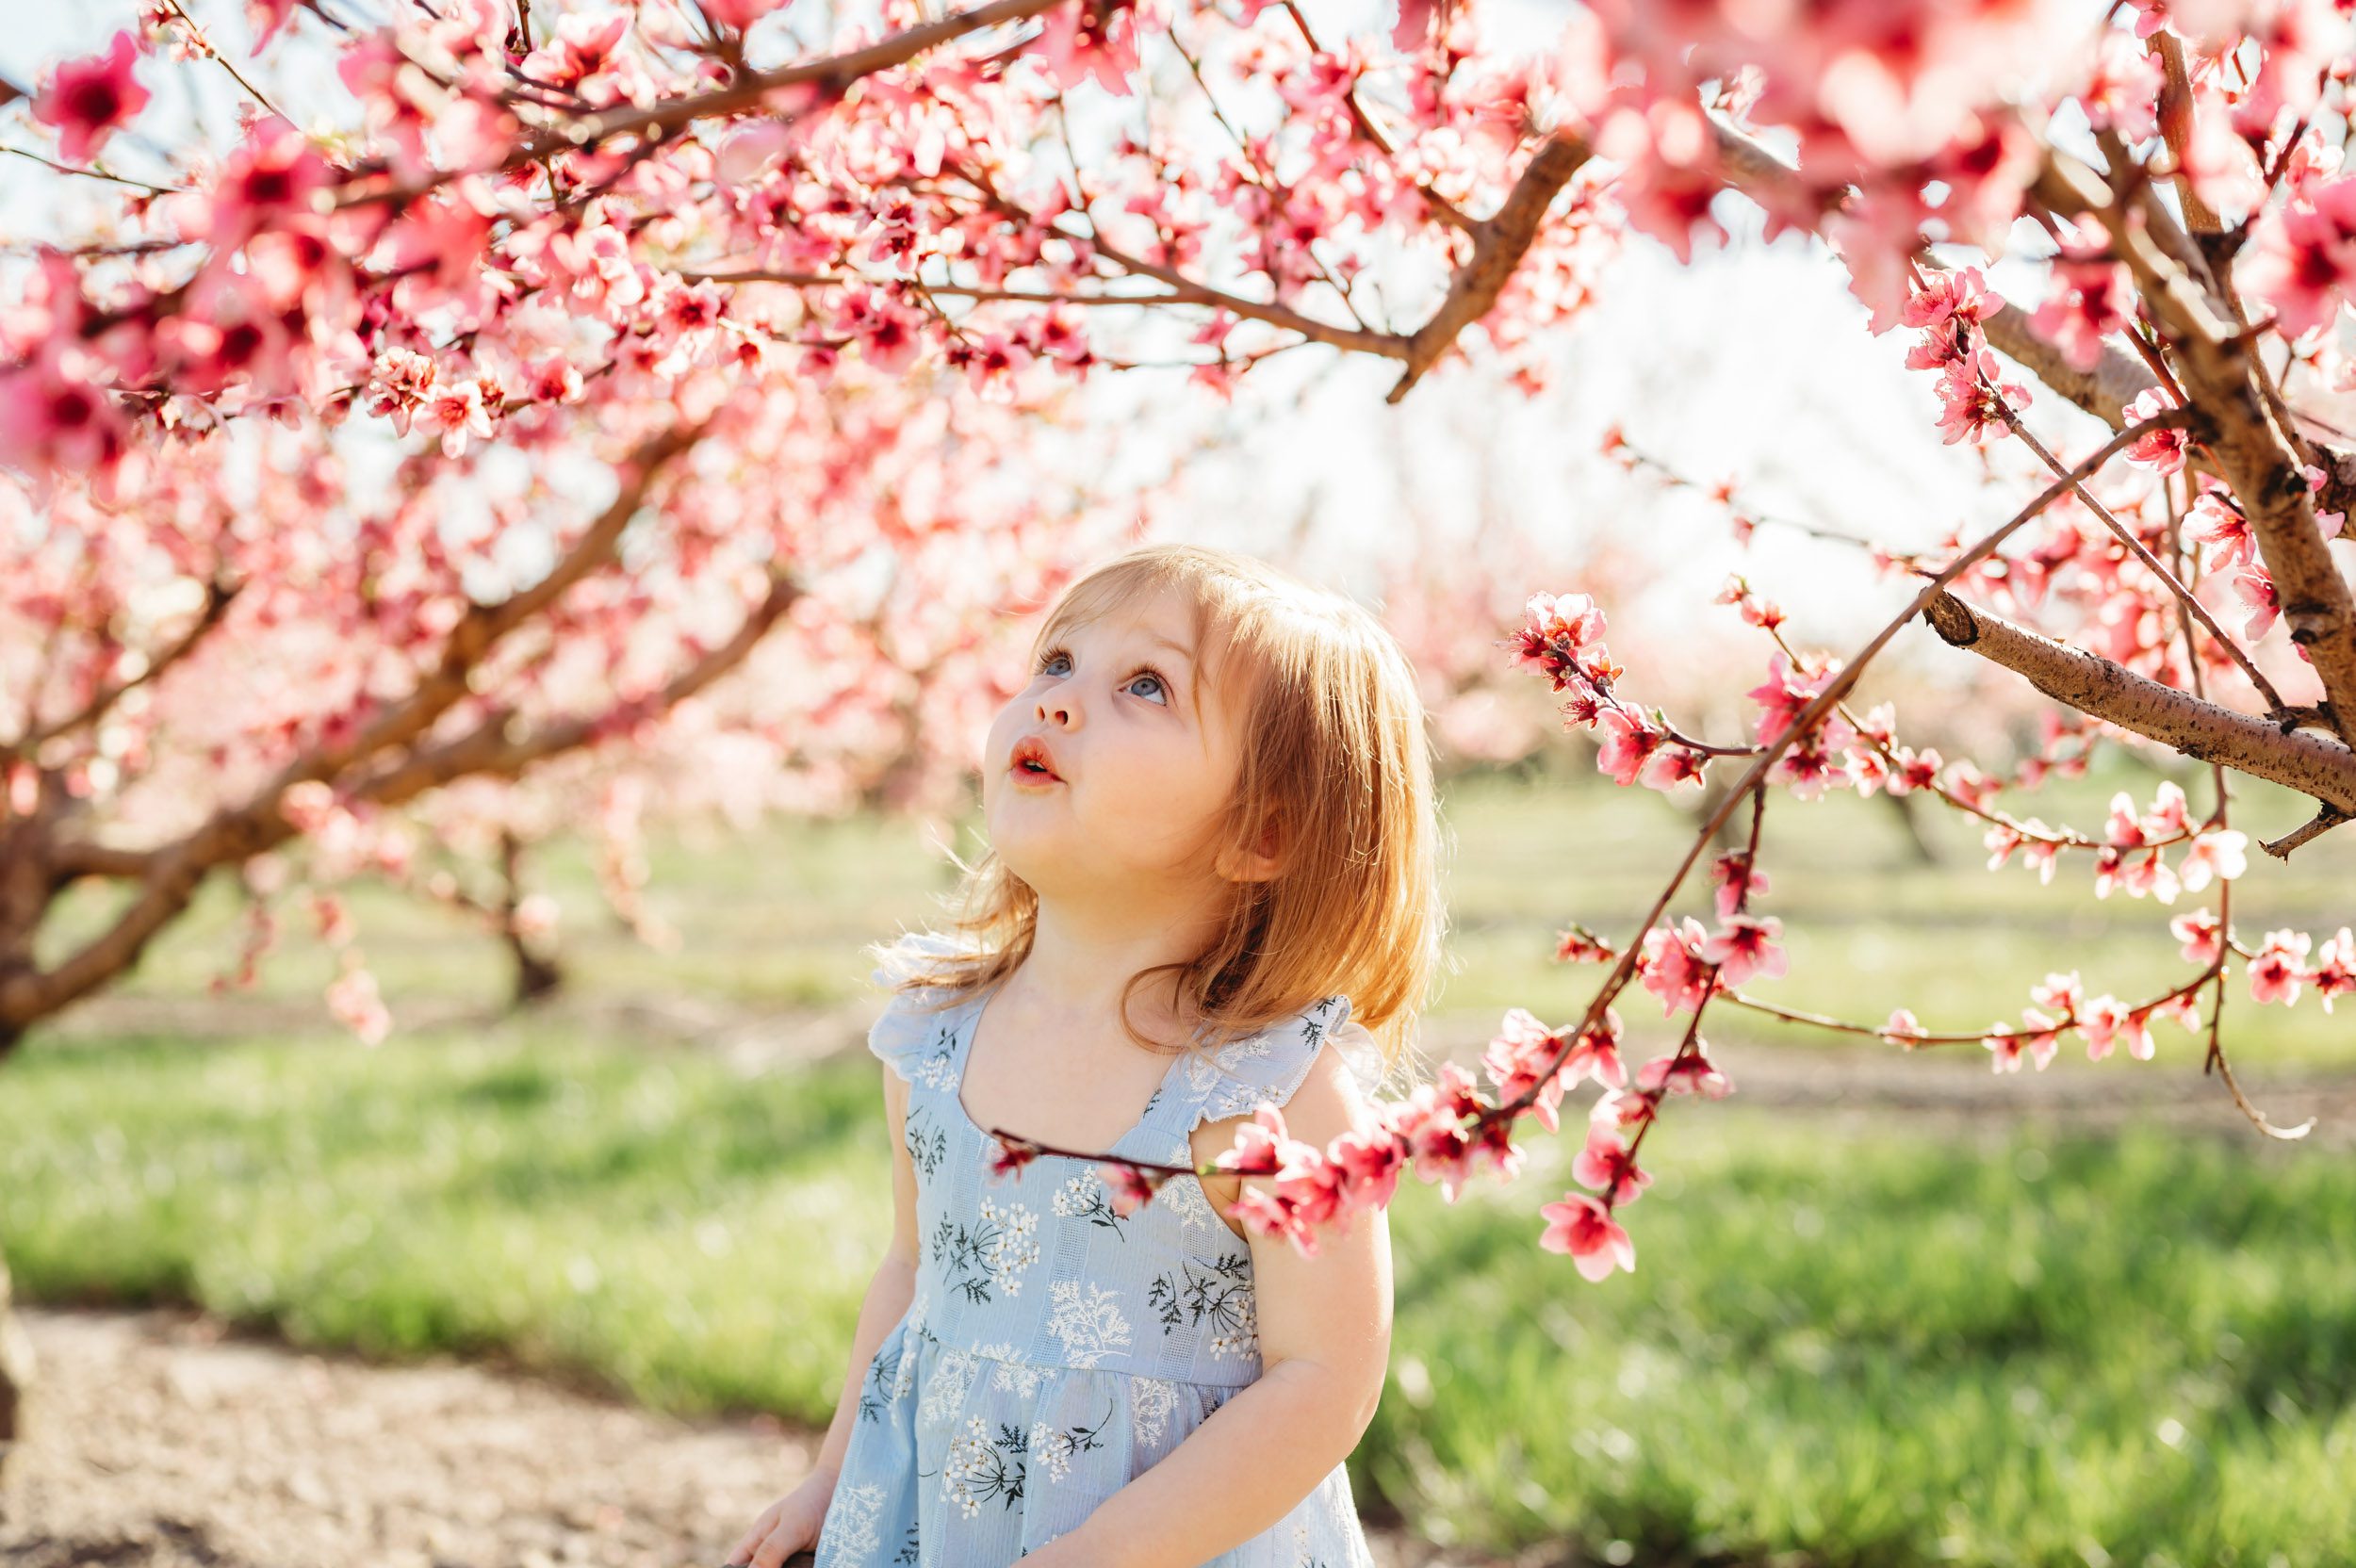 a young girl standing in an orchard surrounded by peach trees full of pink flowers in bloom and looking up at the flowers with a look of wonder on her face